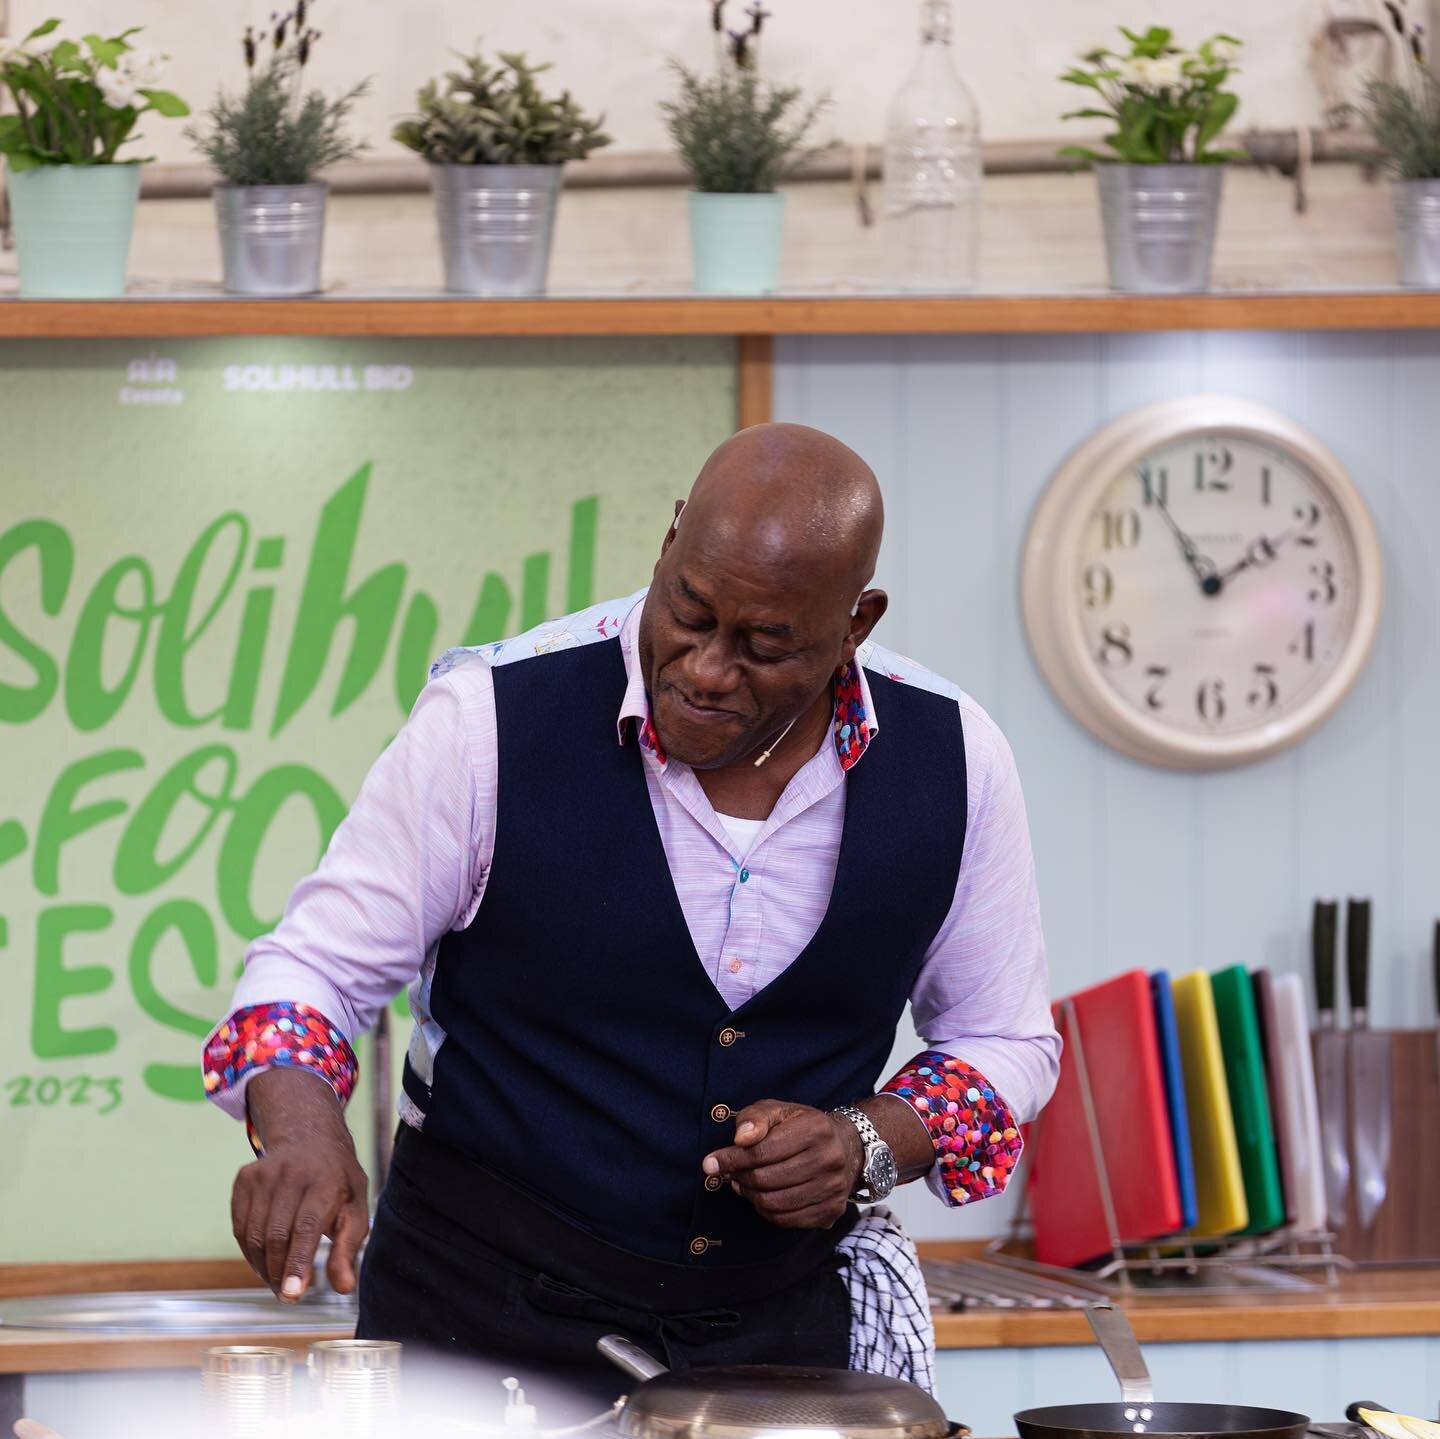 Caught the culinary maestro Ainsley Harriott in action at Solihull Food Festival! 📸🔥 His energy in the kitchen is contagious!